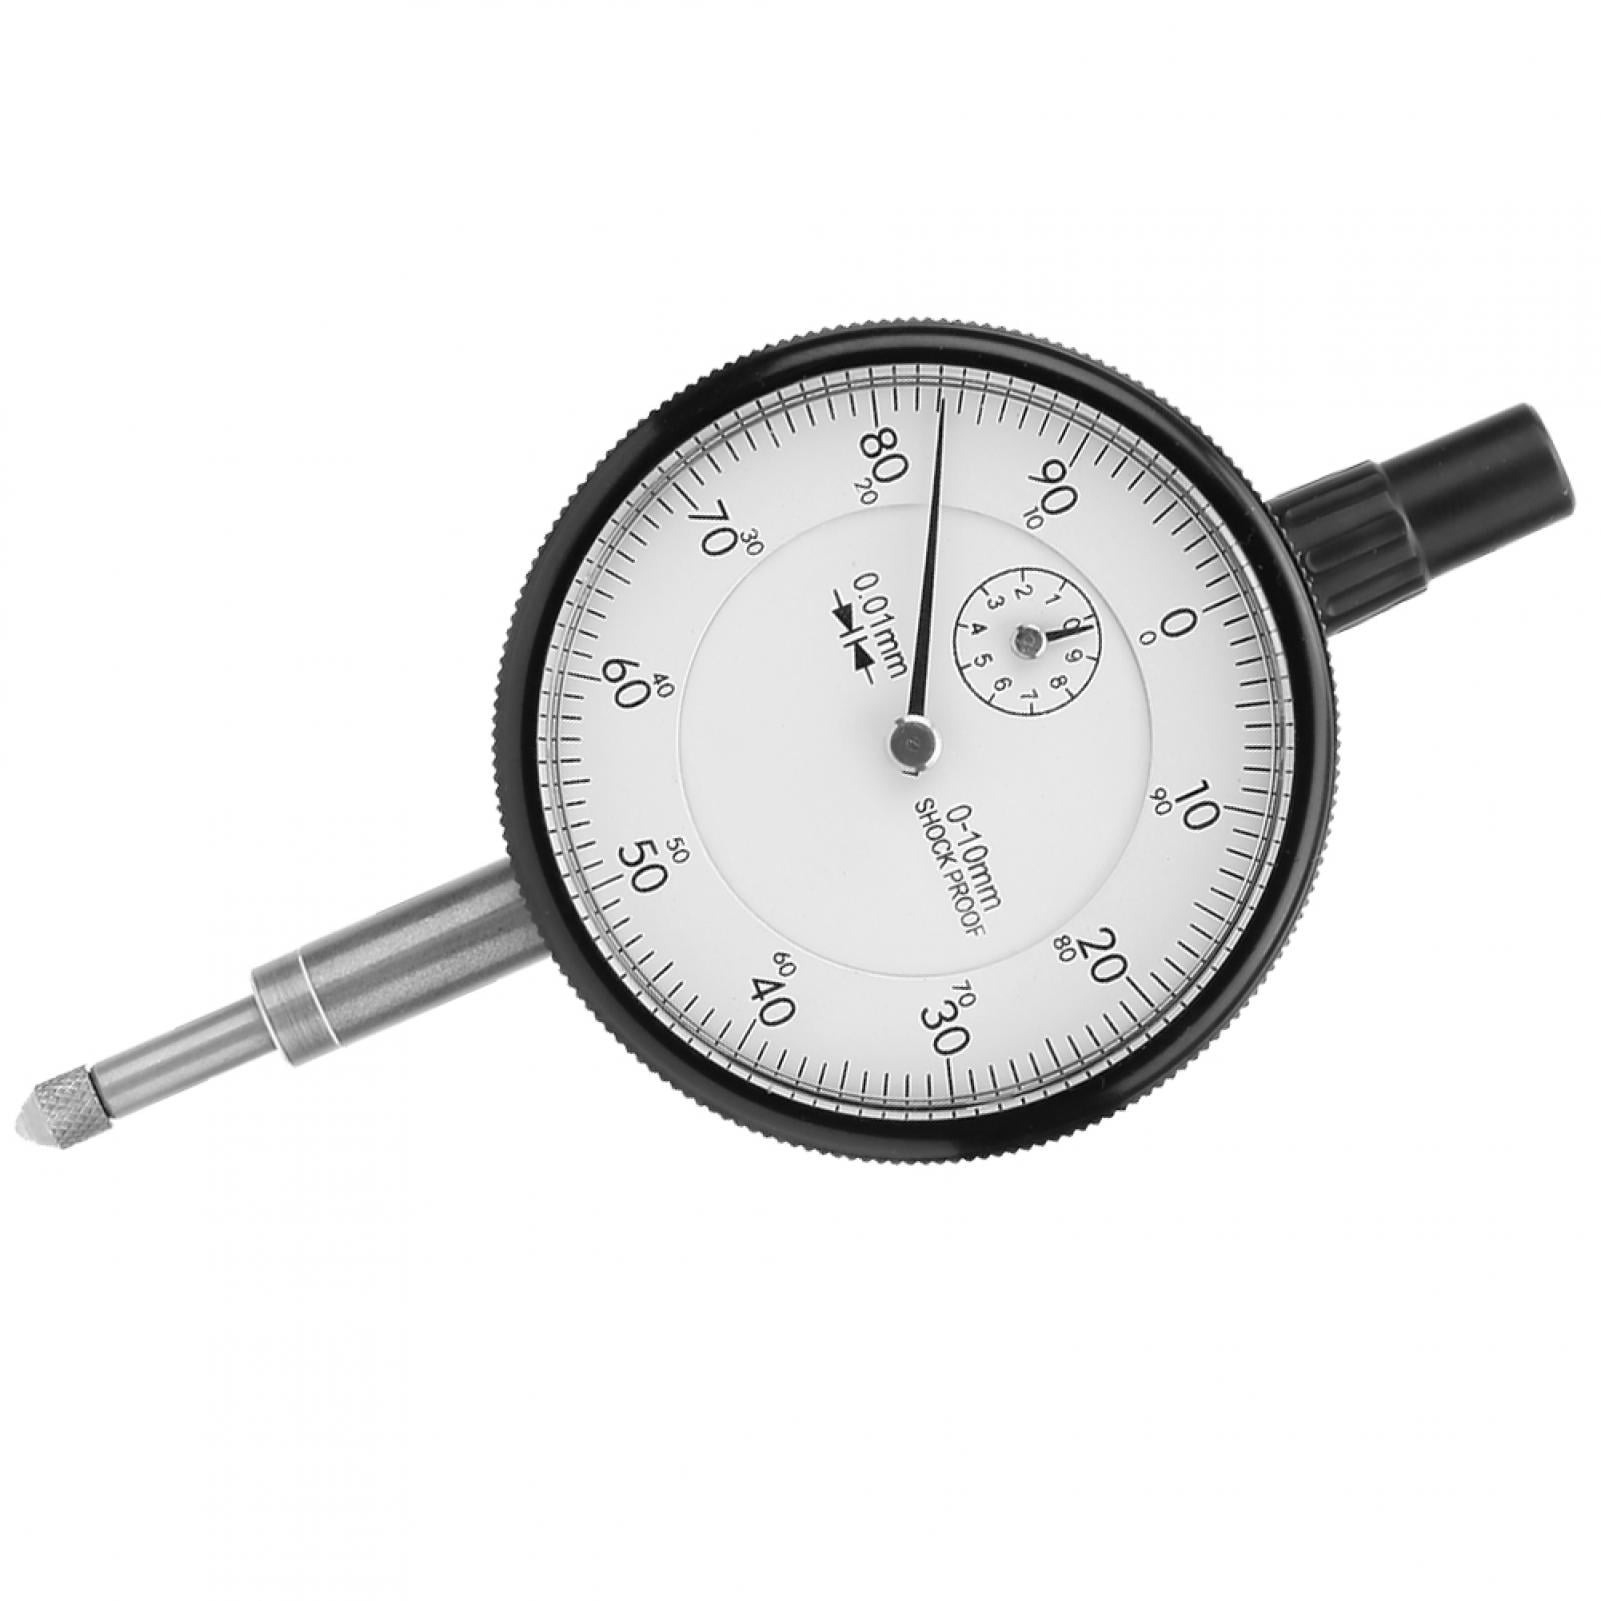 Measurement Instrument Gauge Easy to Carry Practical for Measuring Tool Industrial Hardware Measuring Equipment Industrial Supplies Professional Dial Gauge 